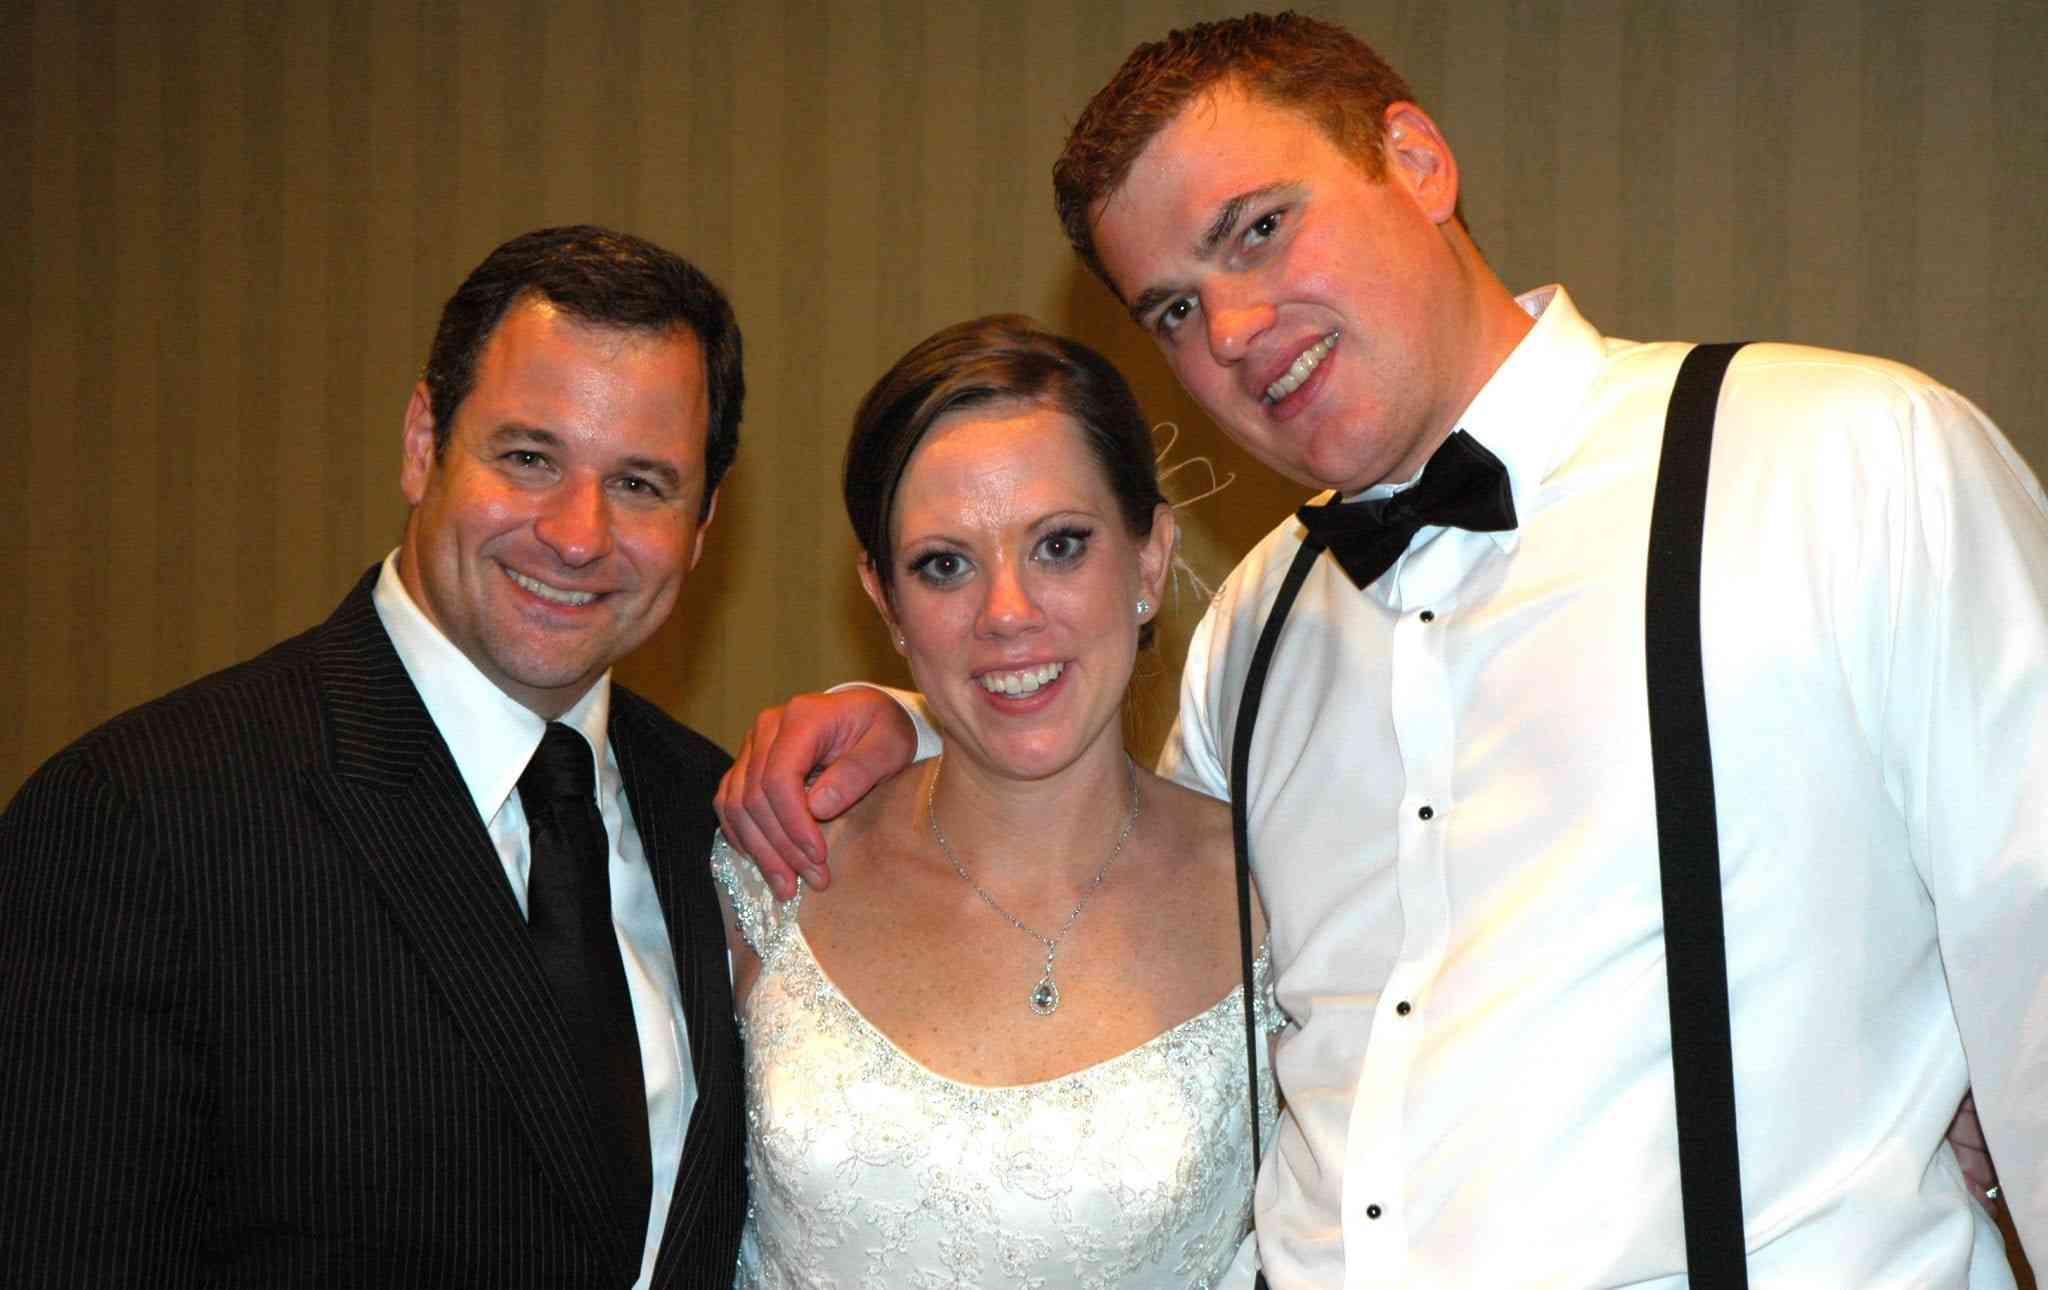 David with bride and groom | DRS Music | David Rothstein Music | Chicago wedding band | Chicago wedding bands | Chicago wedding Music | Best Chicago Wedding Band